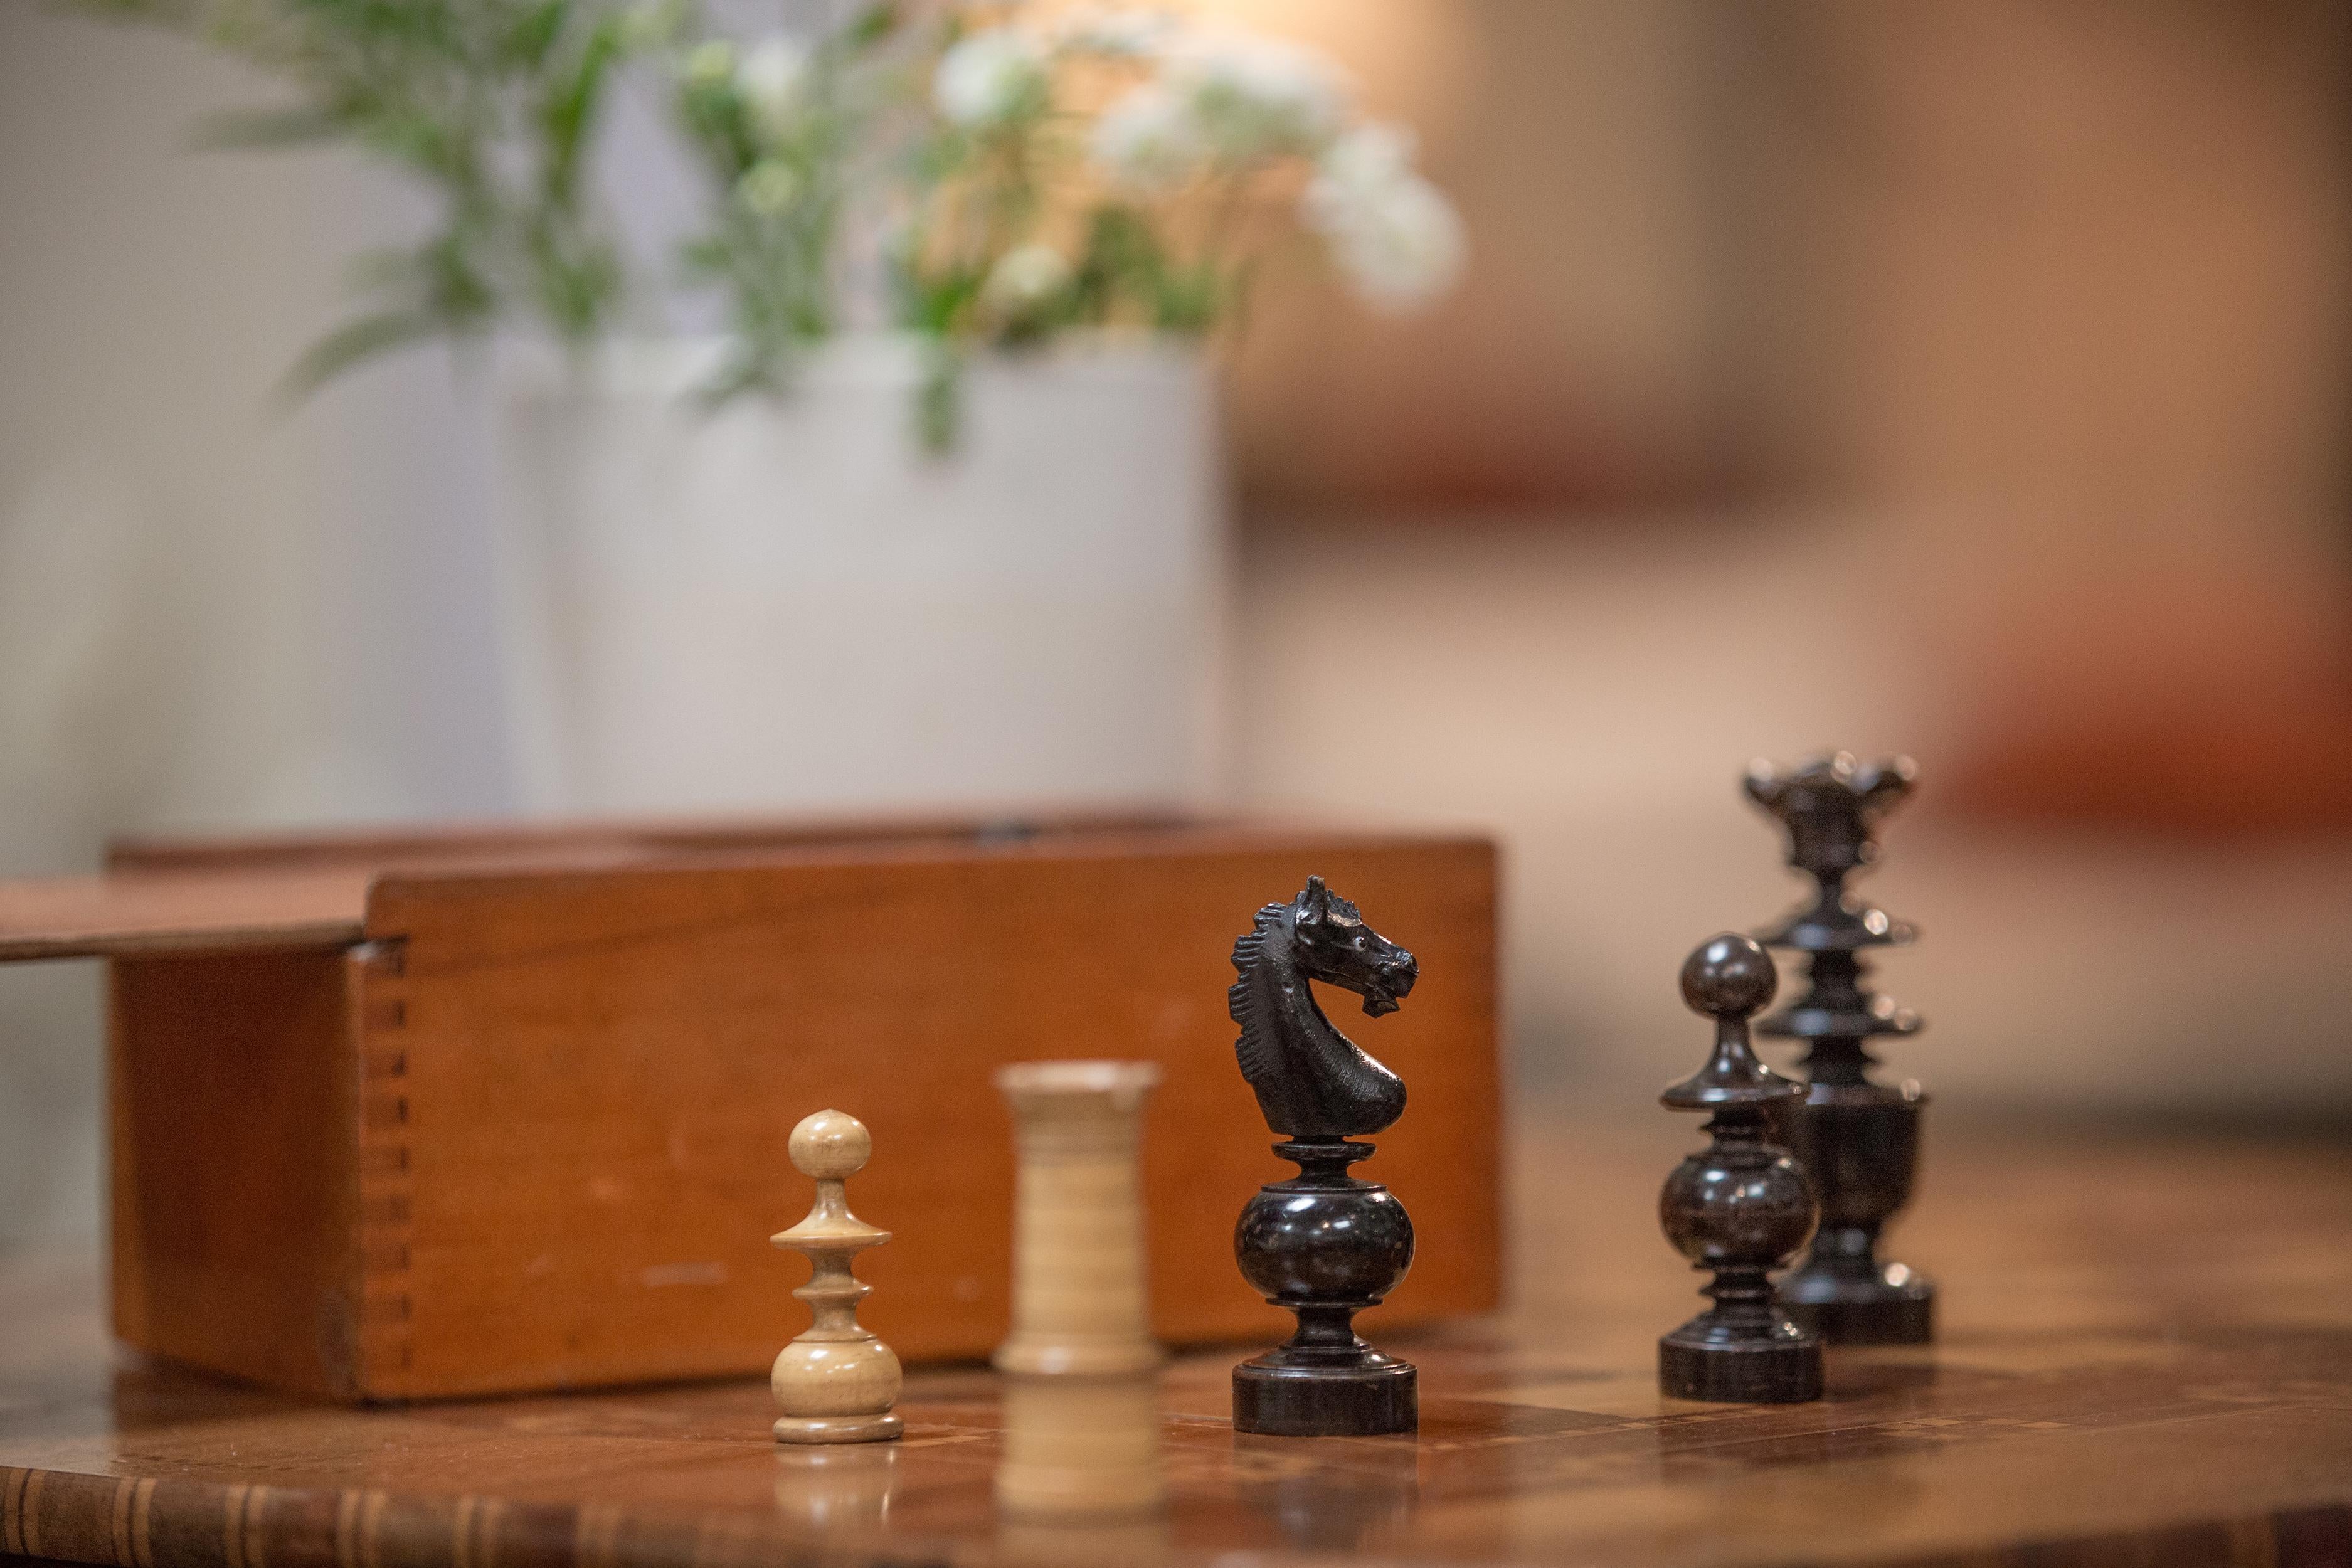 Chess set in Ash, circa 1860. Ranging in height from 2-inches to 3.75-inches tall.